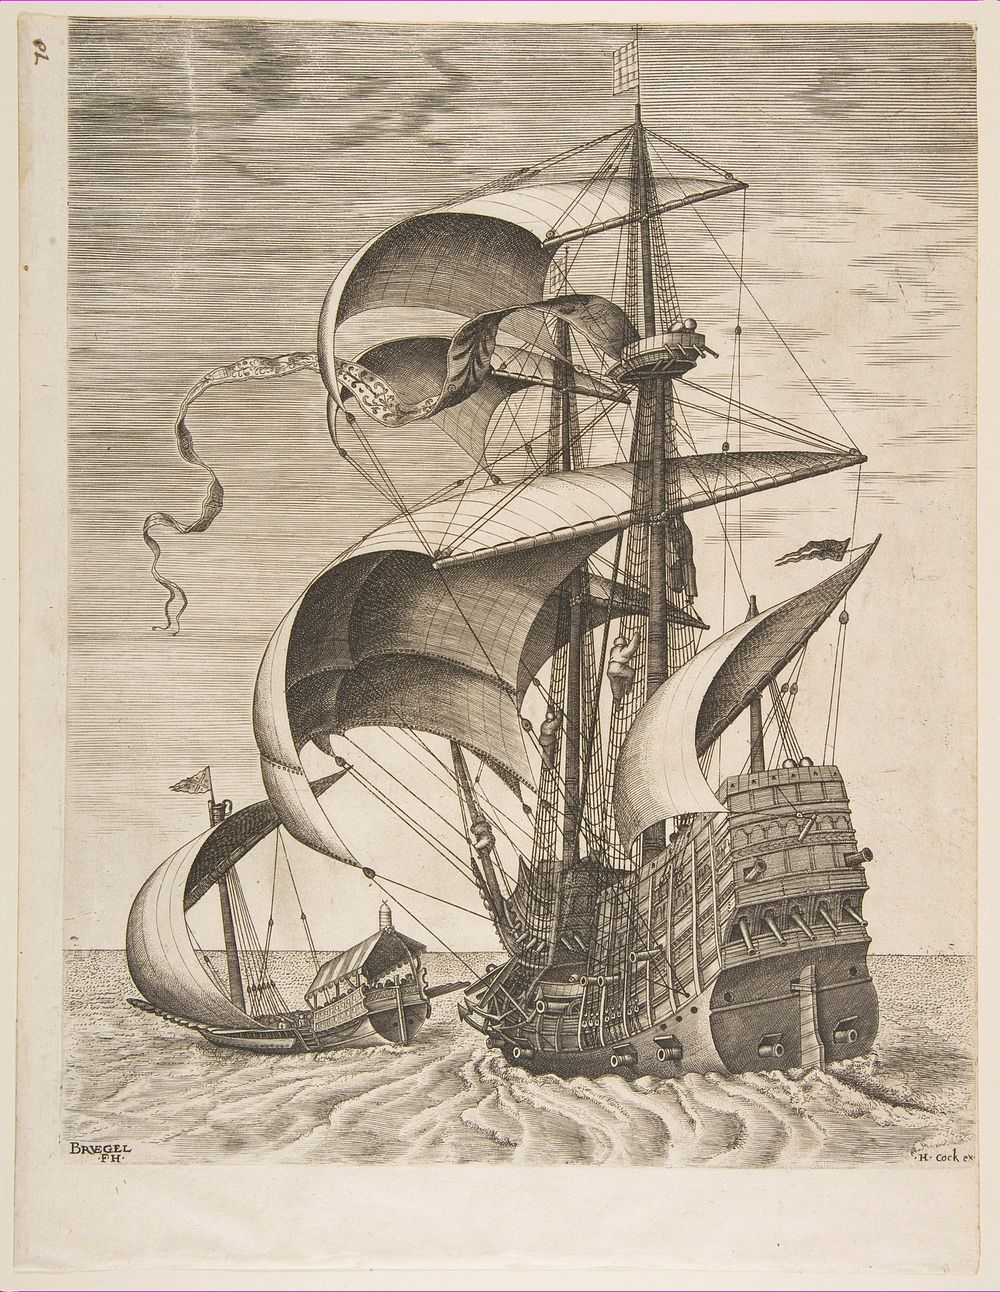 Armed Three-Master on the Open Sea Accompanied by a Galley from The Sailing Vessels by Hieronymus Cock